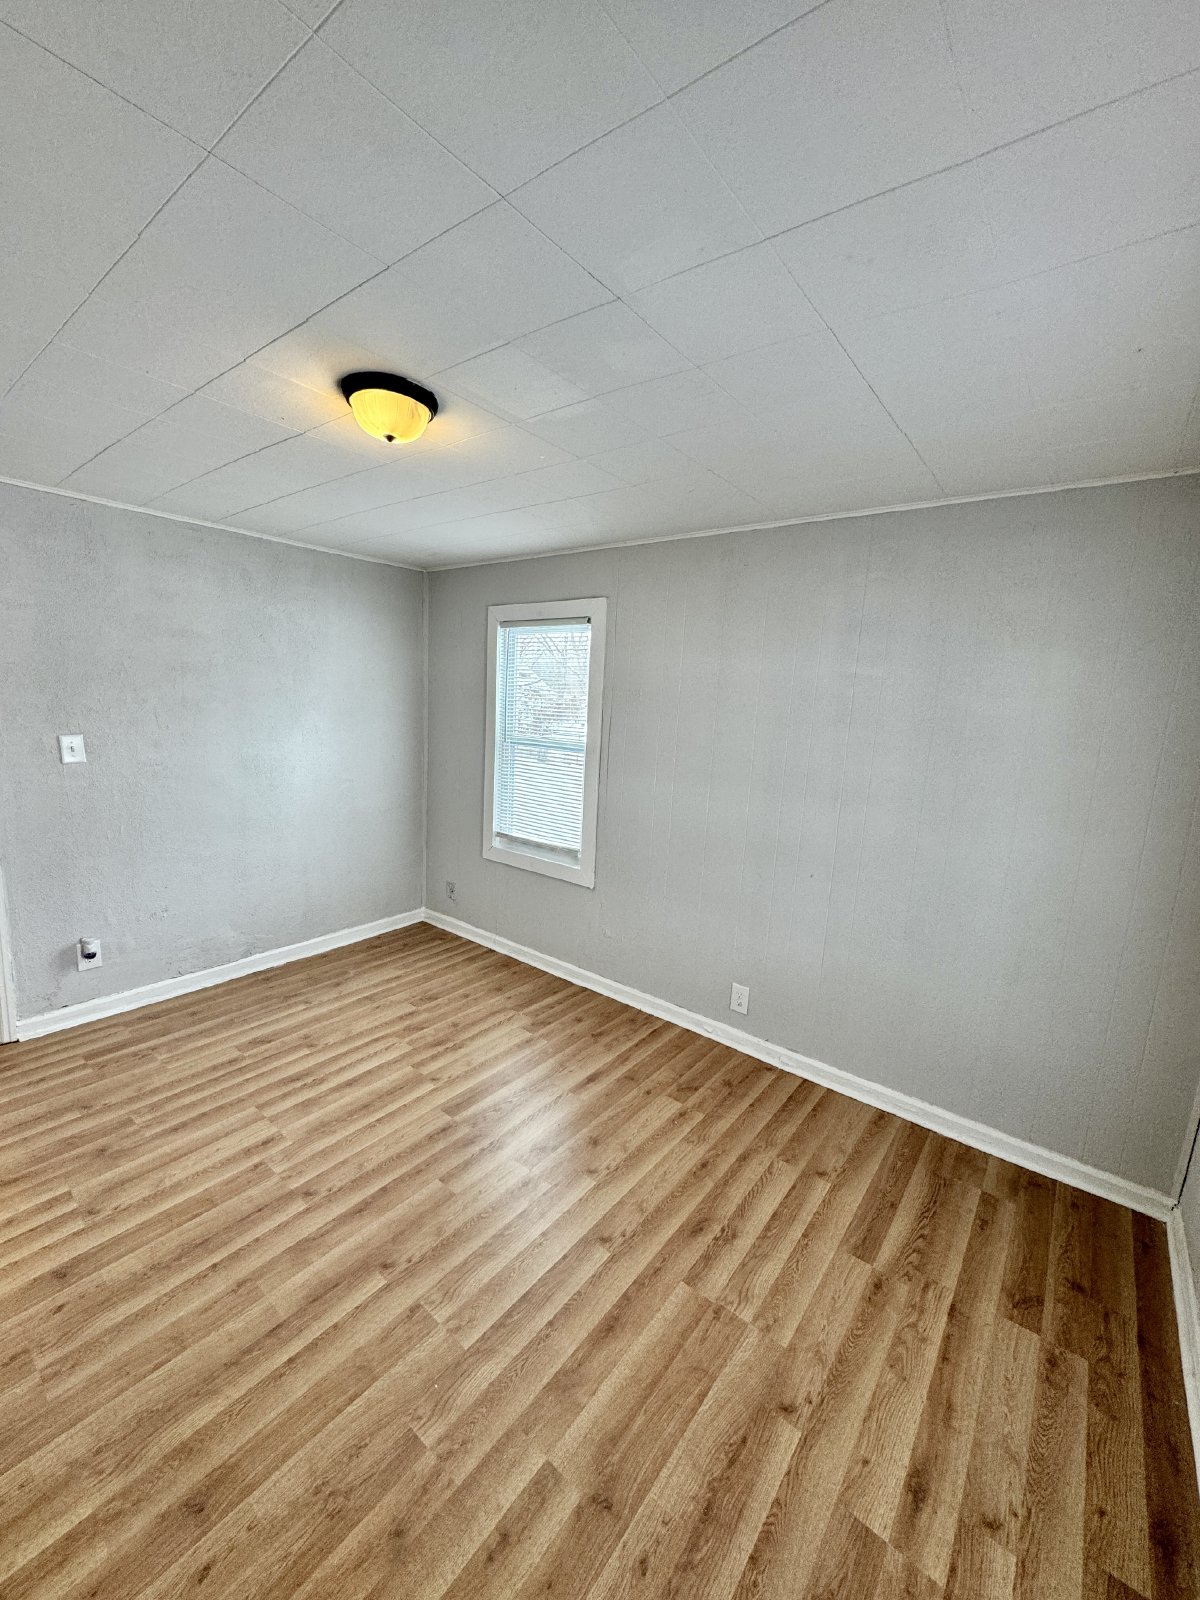 3056 N Euclid-2 bed/1 Bath - Move in ready property image